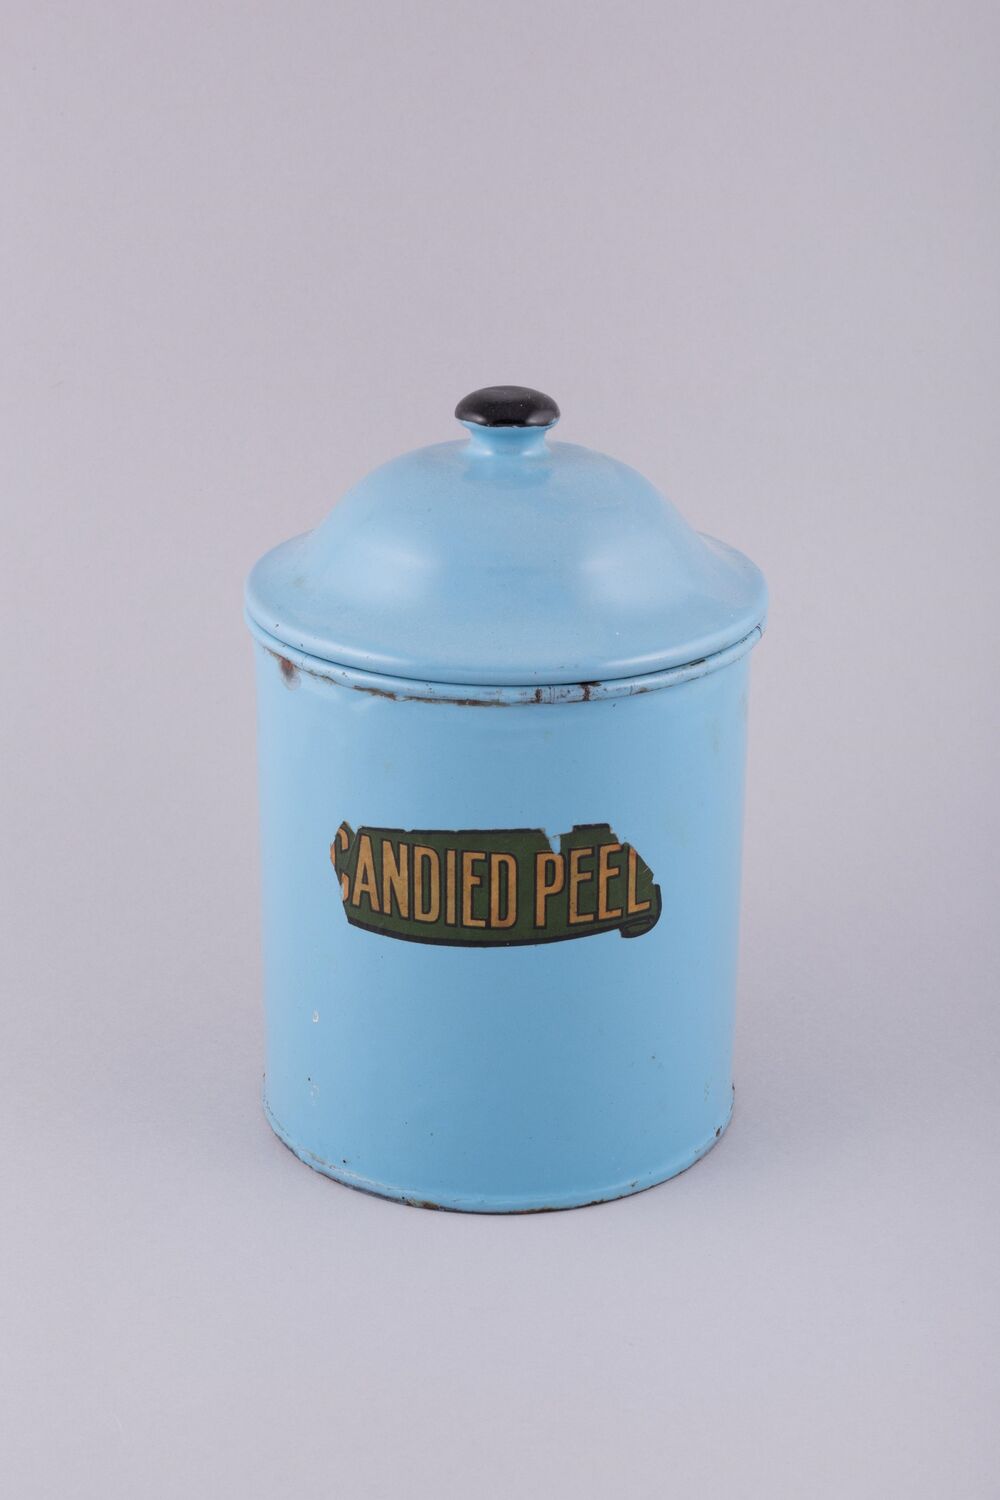 A blue metal cannister tin is displayed against a plain grey background. It has a slightly damaged label, from which can still be read Candied Peel.